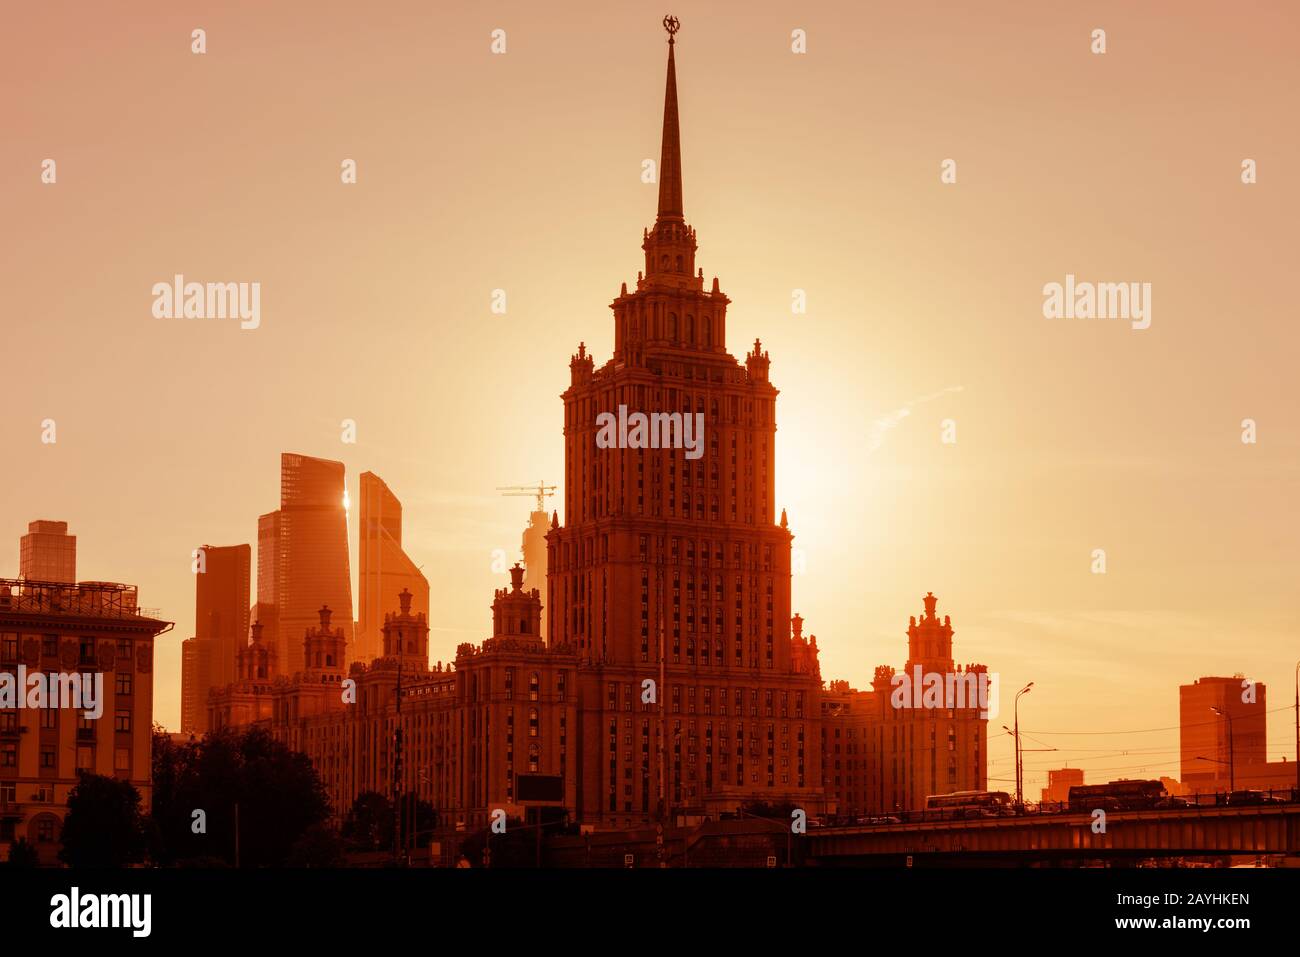 Radisson Royal Hotel (former Ukraine) at sunset, Moscow, Russia. It is a Stalinist skyscraper and landmark of Moscow. Sunny panorama of Moscow Stock Photo